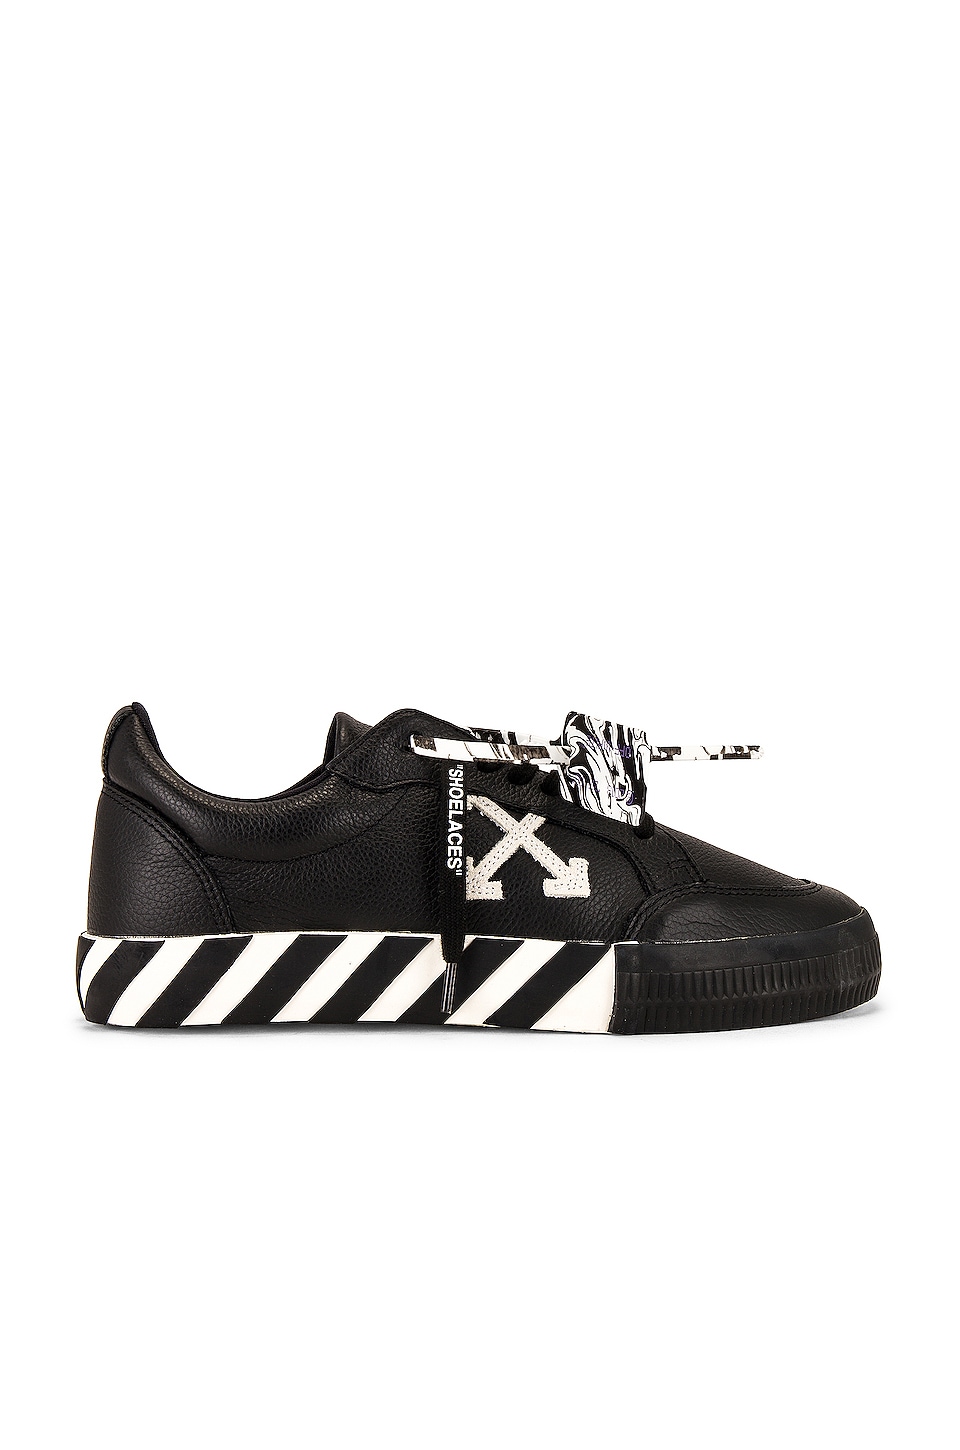 Off-White Low Vulcanized Calf Leather Sneaker | sites.unimi.it